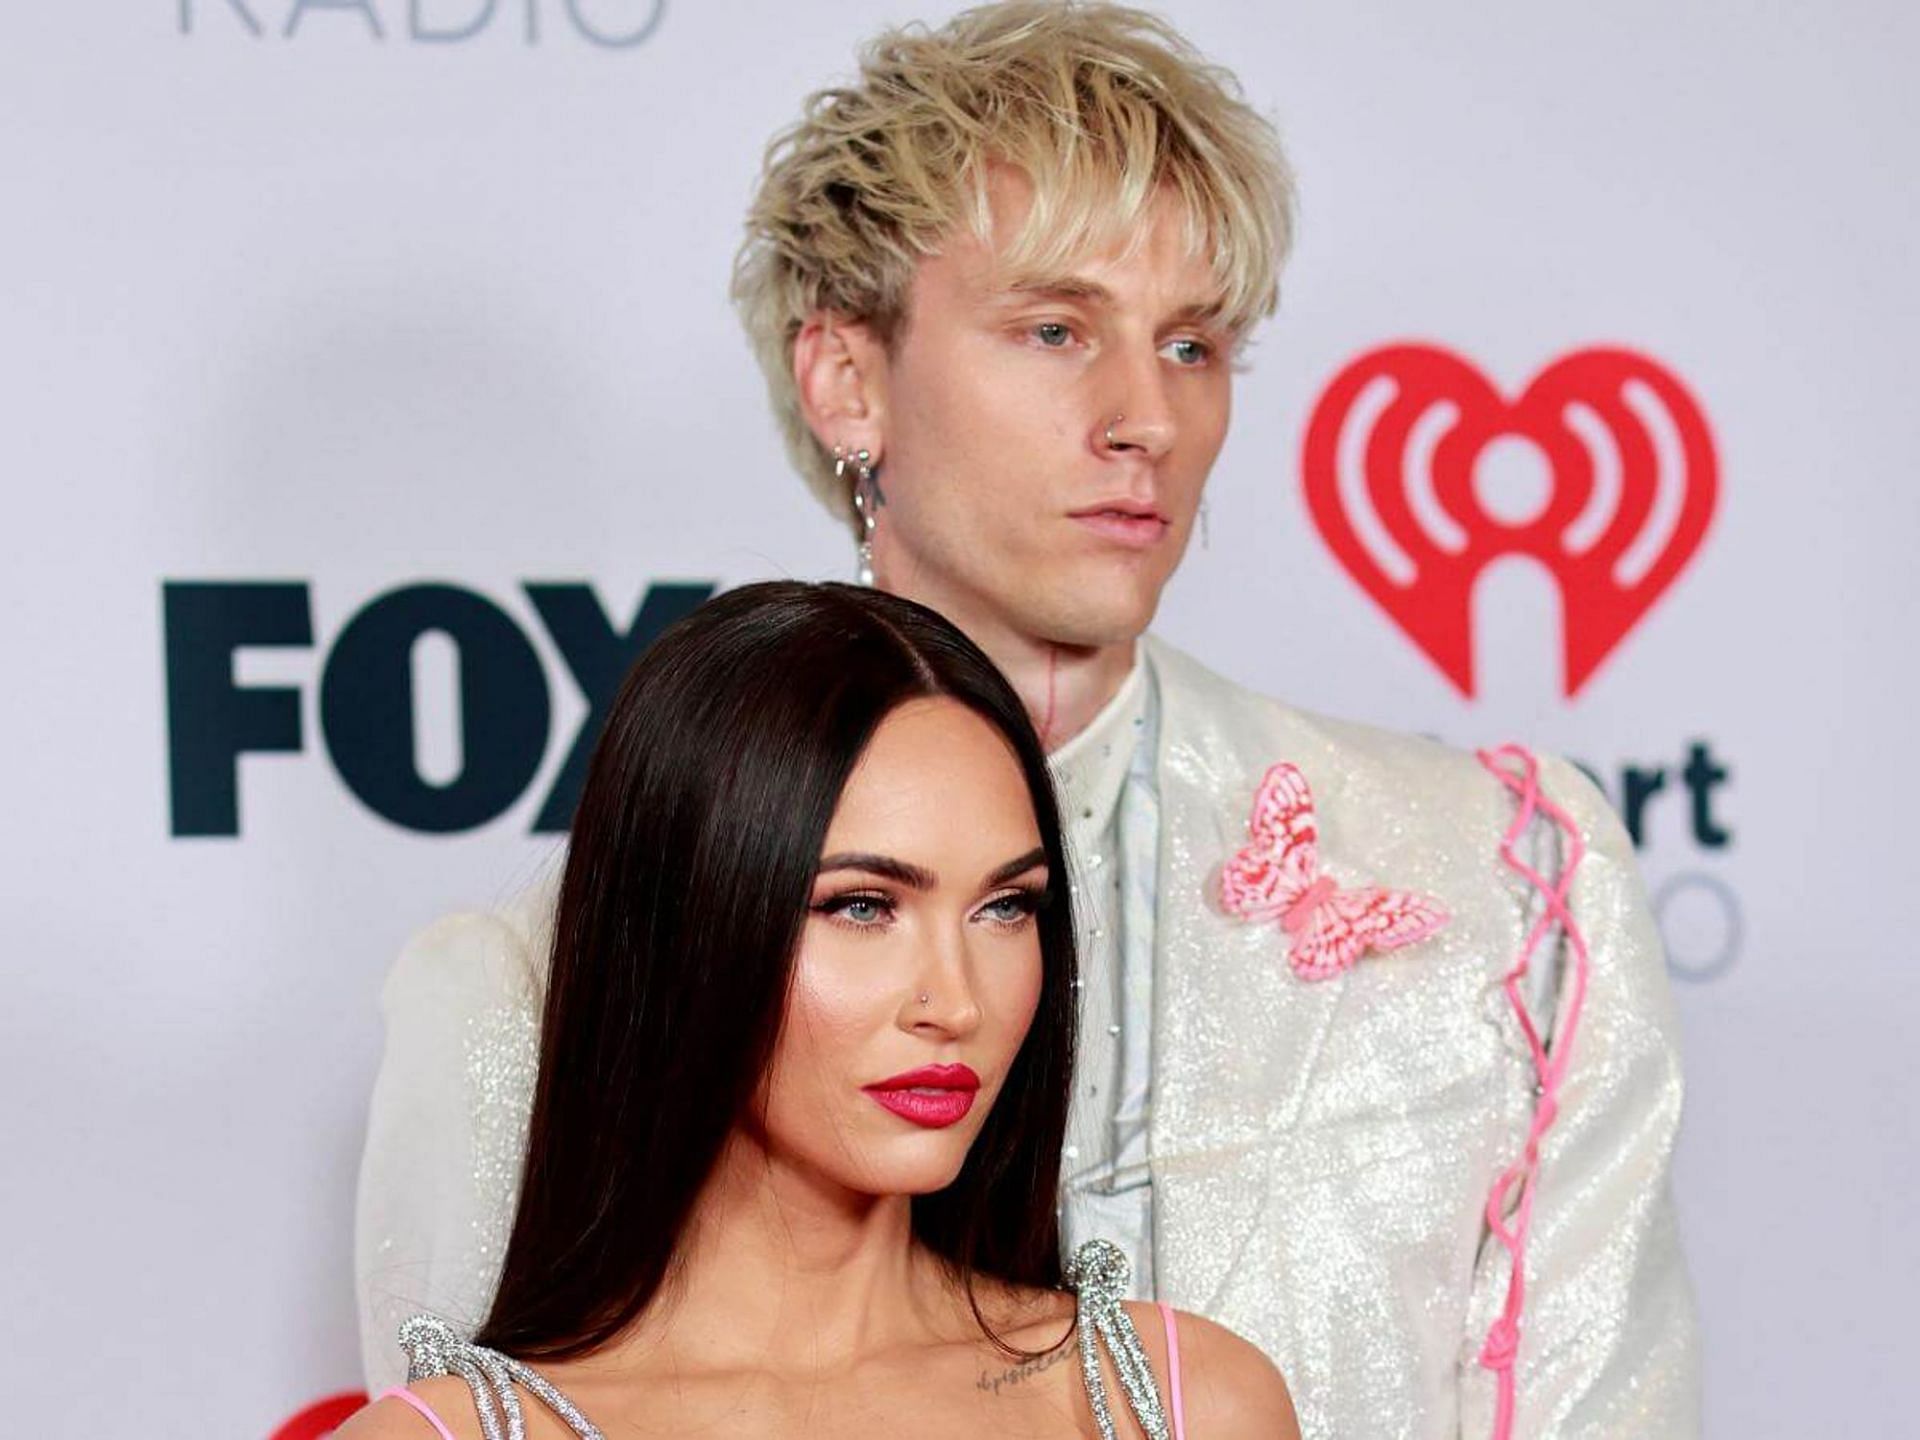 Rumors of MGK and Megan Fox breaking up surface online (Image via Getty Images)